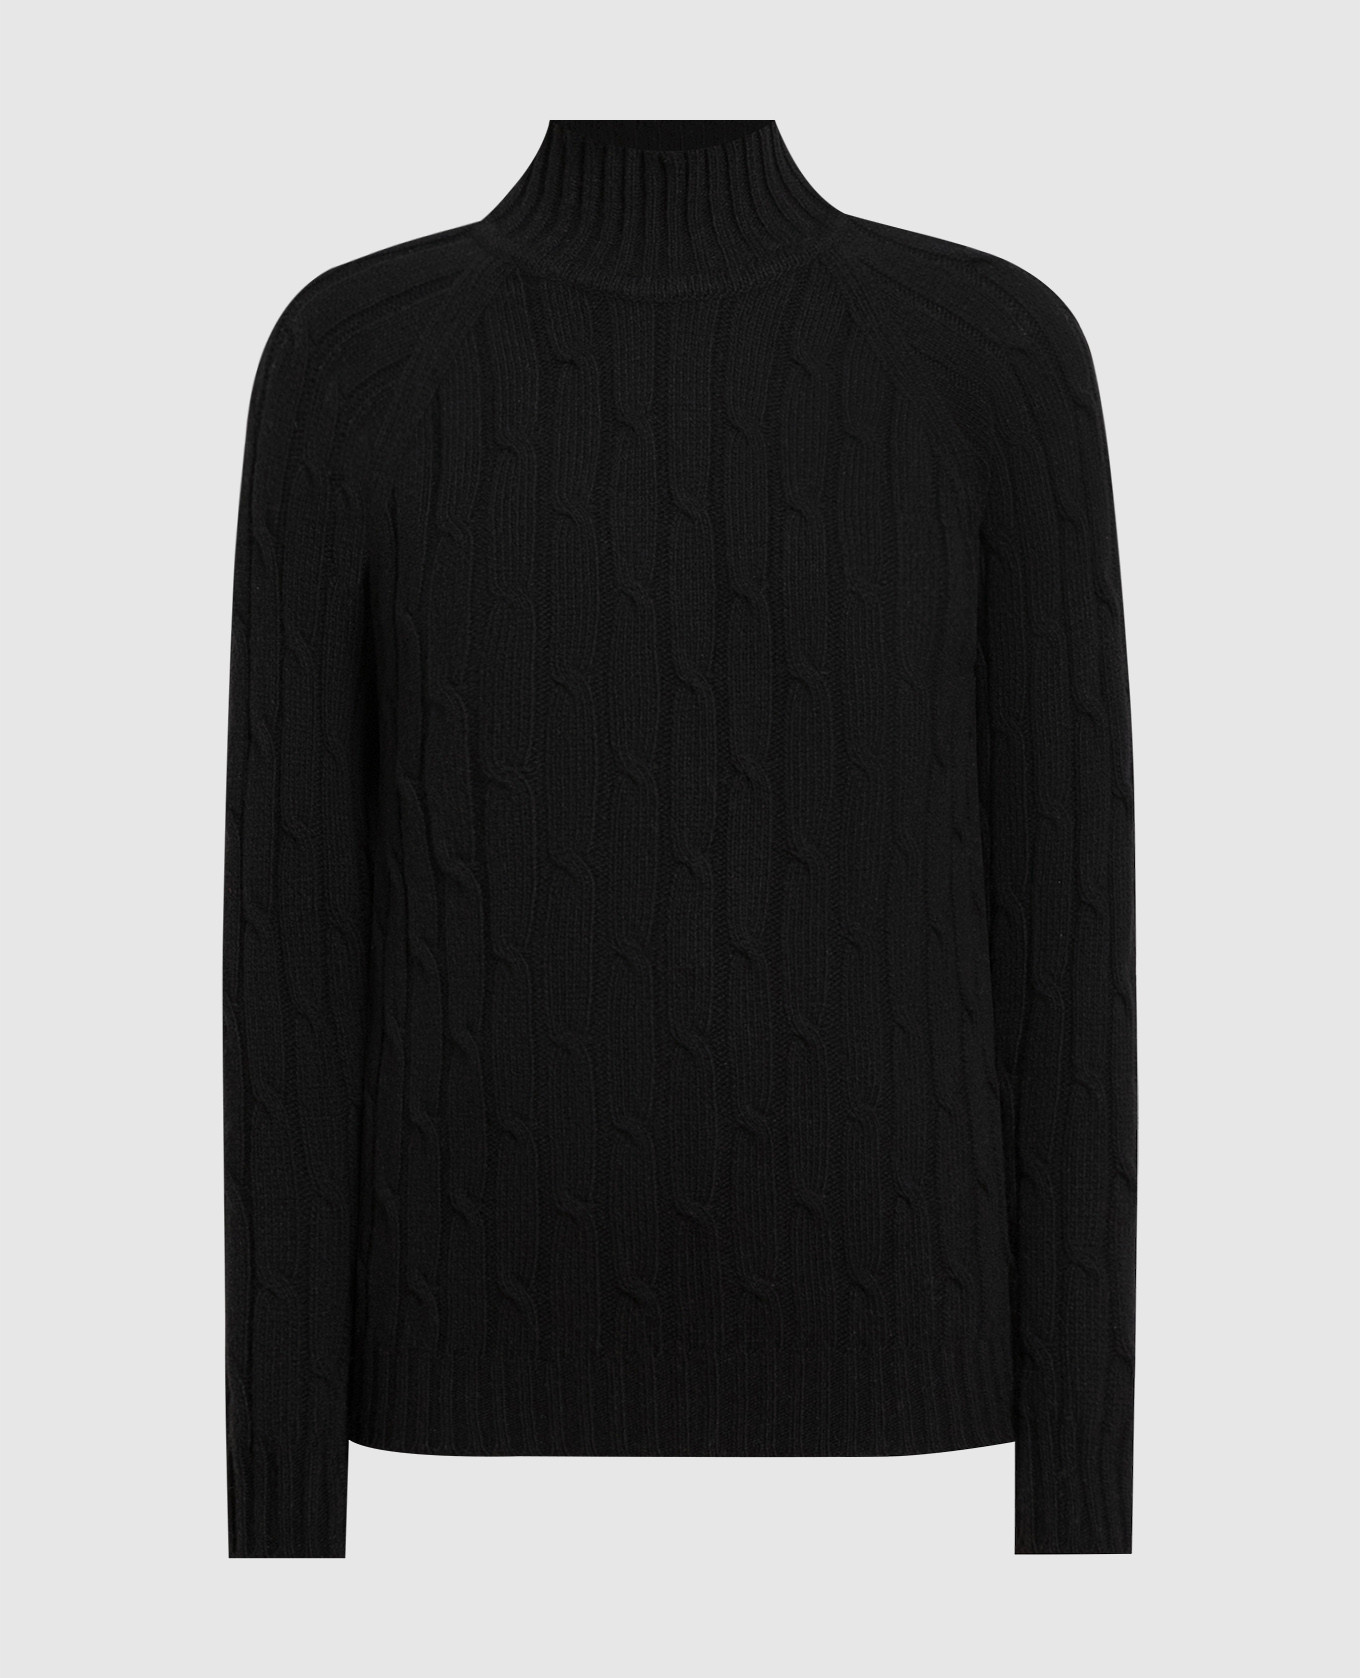 Black sweater made of cashmere in a textured pattern